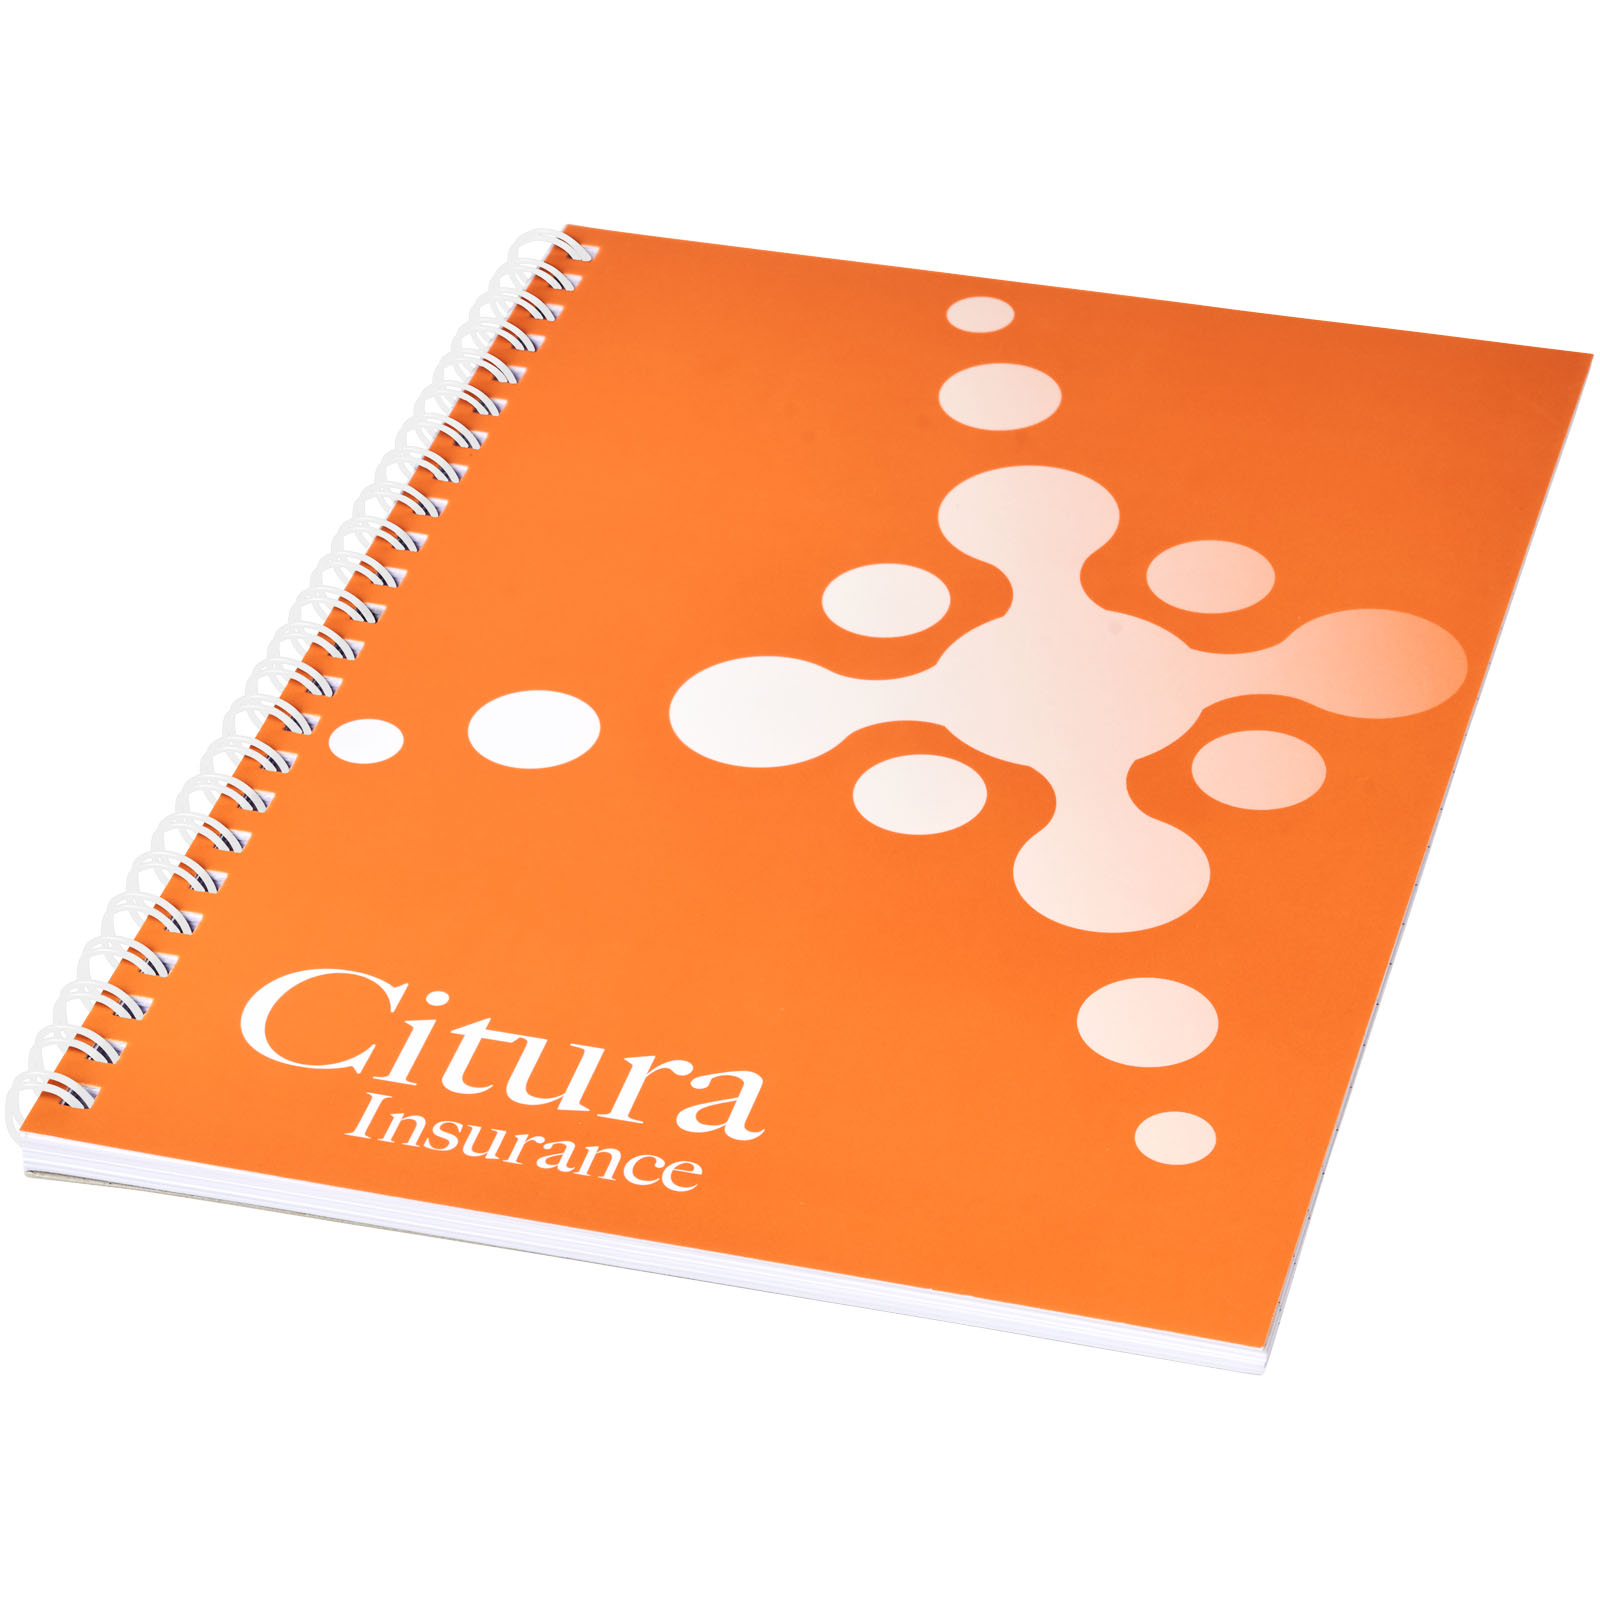 Cuaderno Espiral Impermeable ColorSplash® - Shere - Carrizosa